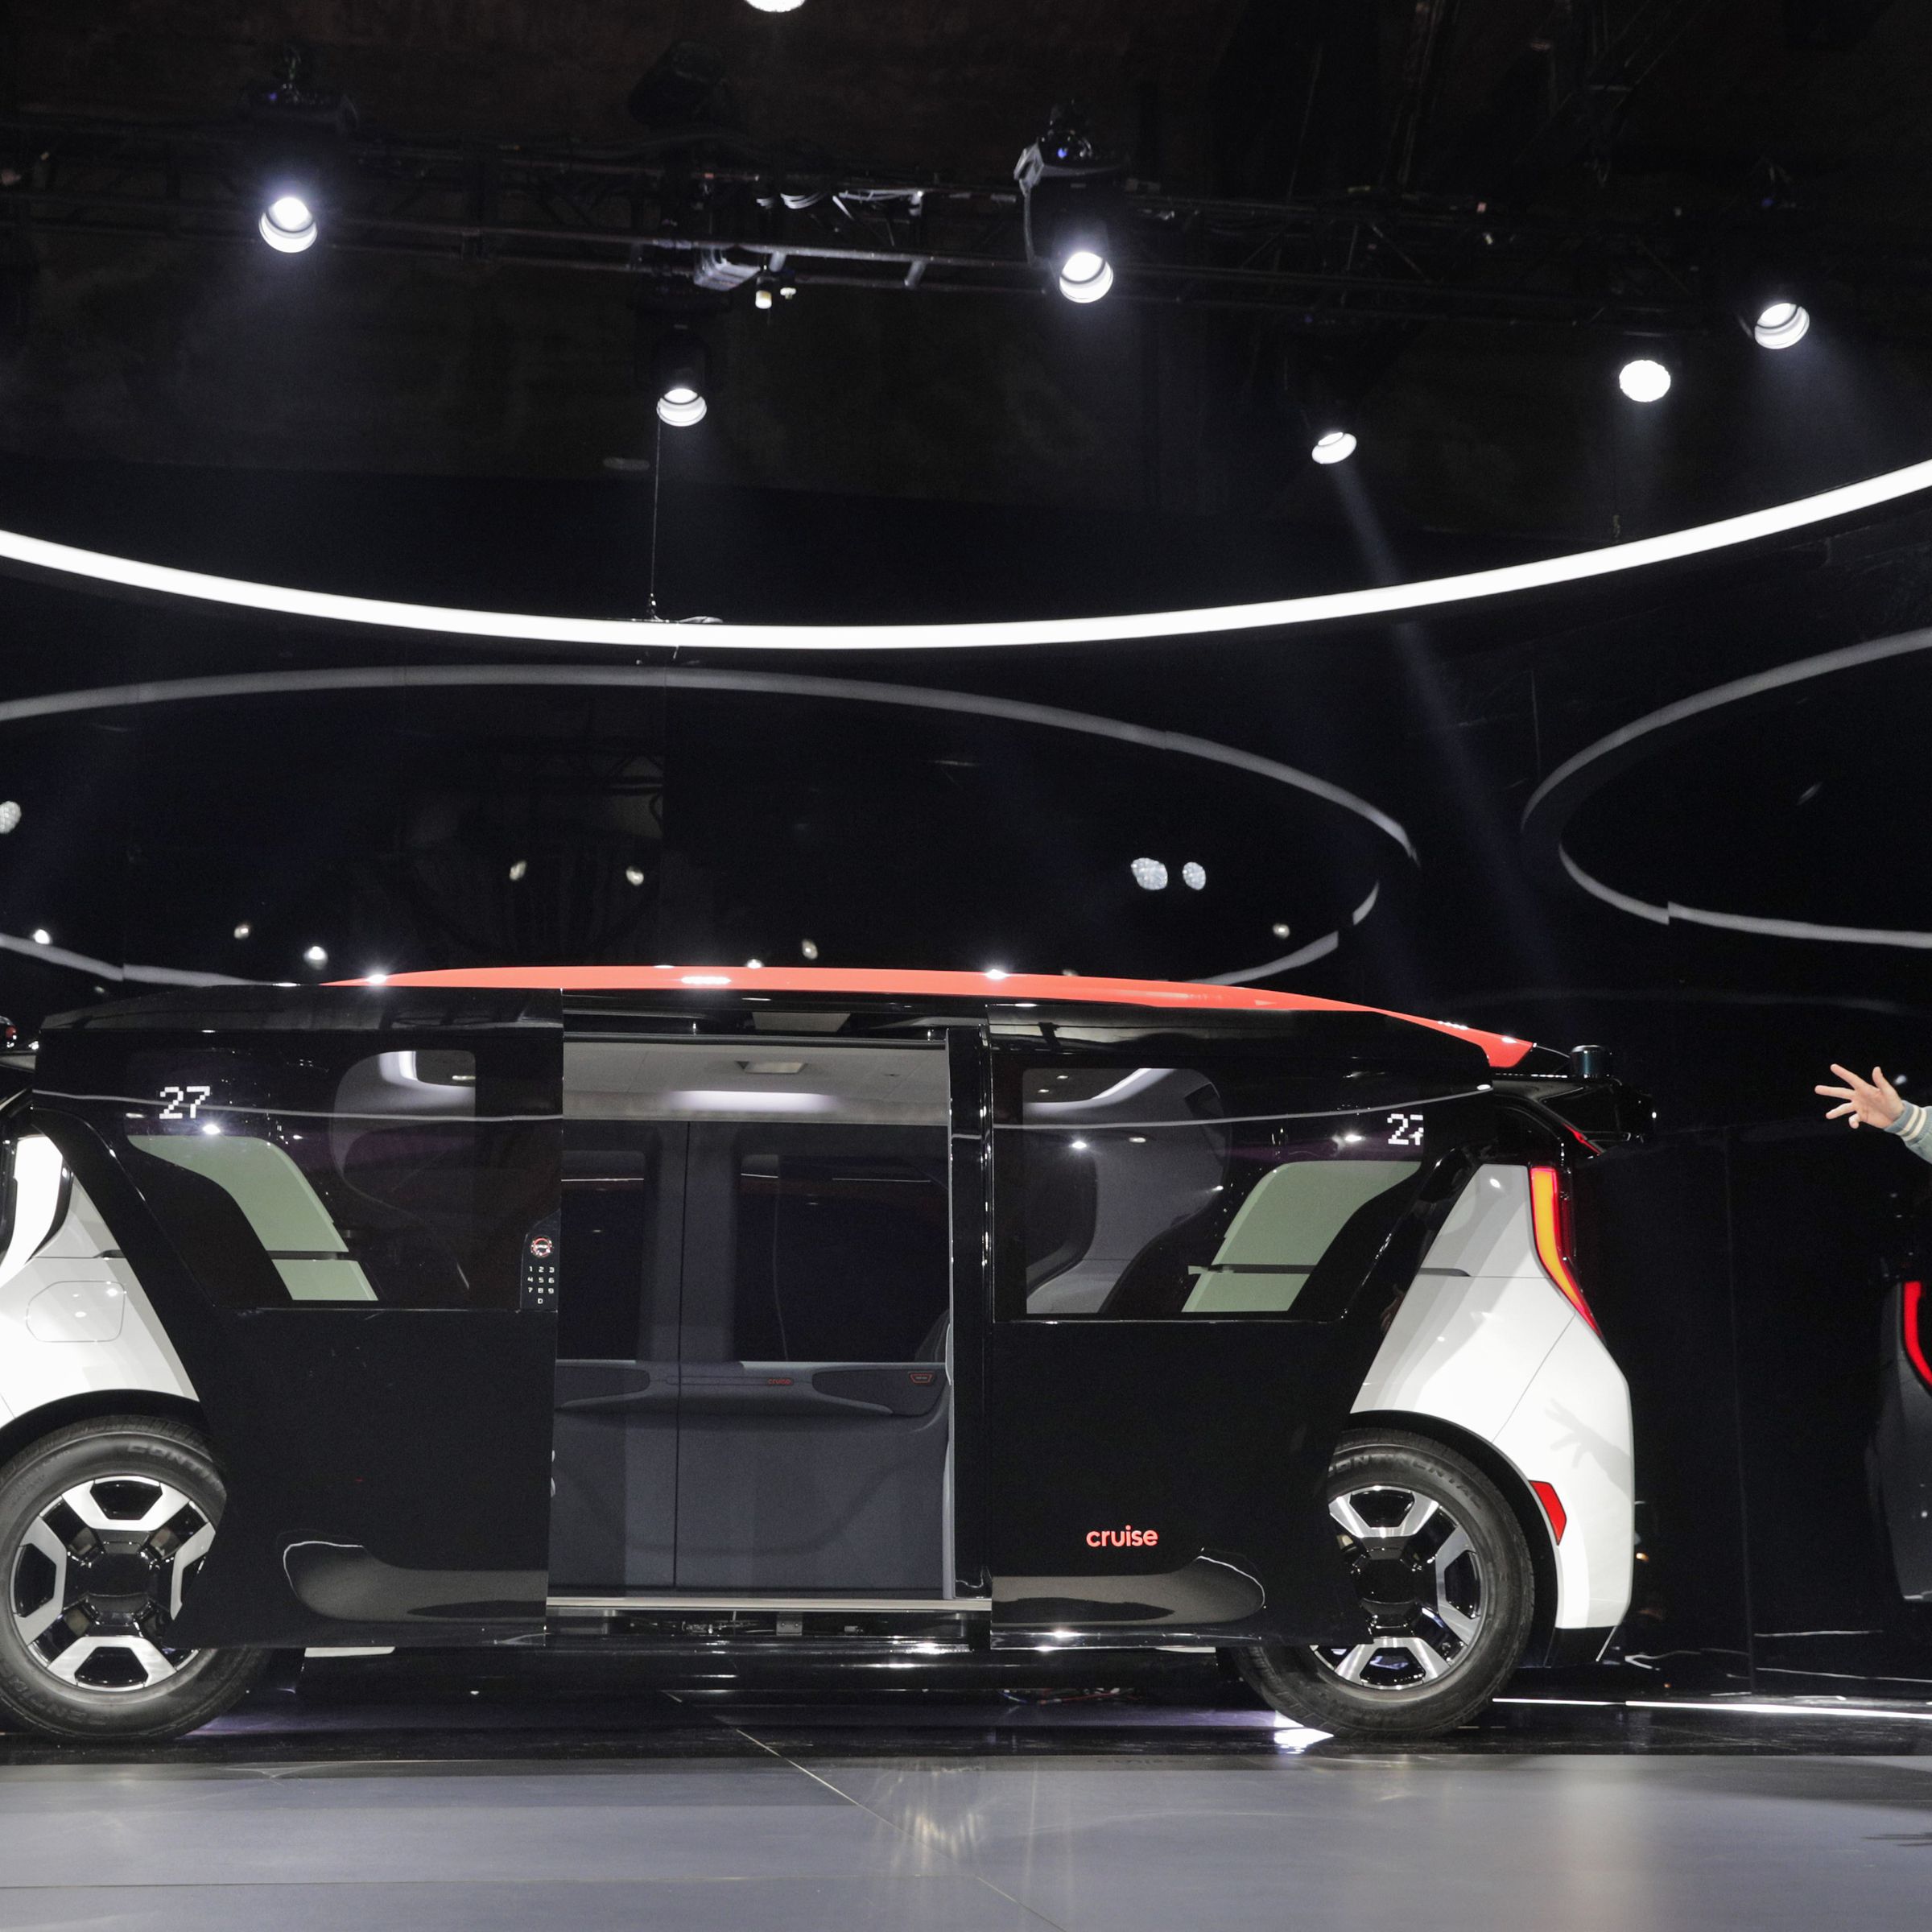 Kyle Vogt, speaks near the new Cruise Origin, at the unveiling of the new, fully autonomous passenger vehicle in San Francisco, Calif., on Tuesday, January 21, 2020